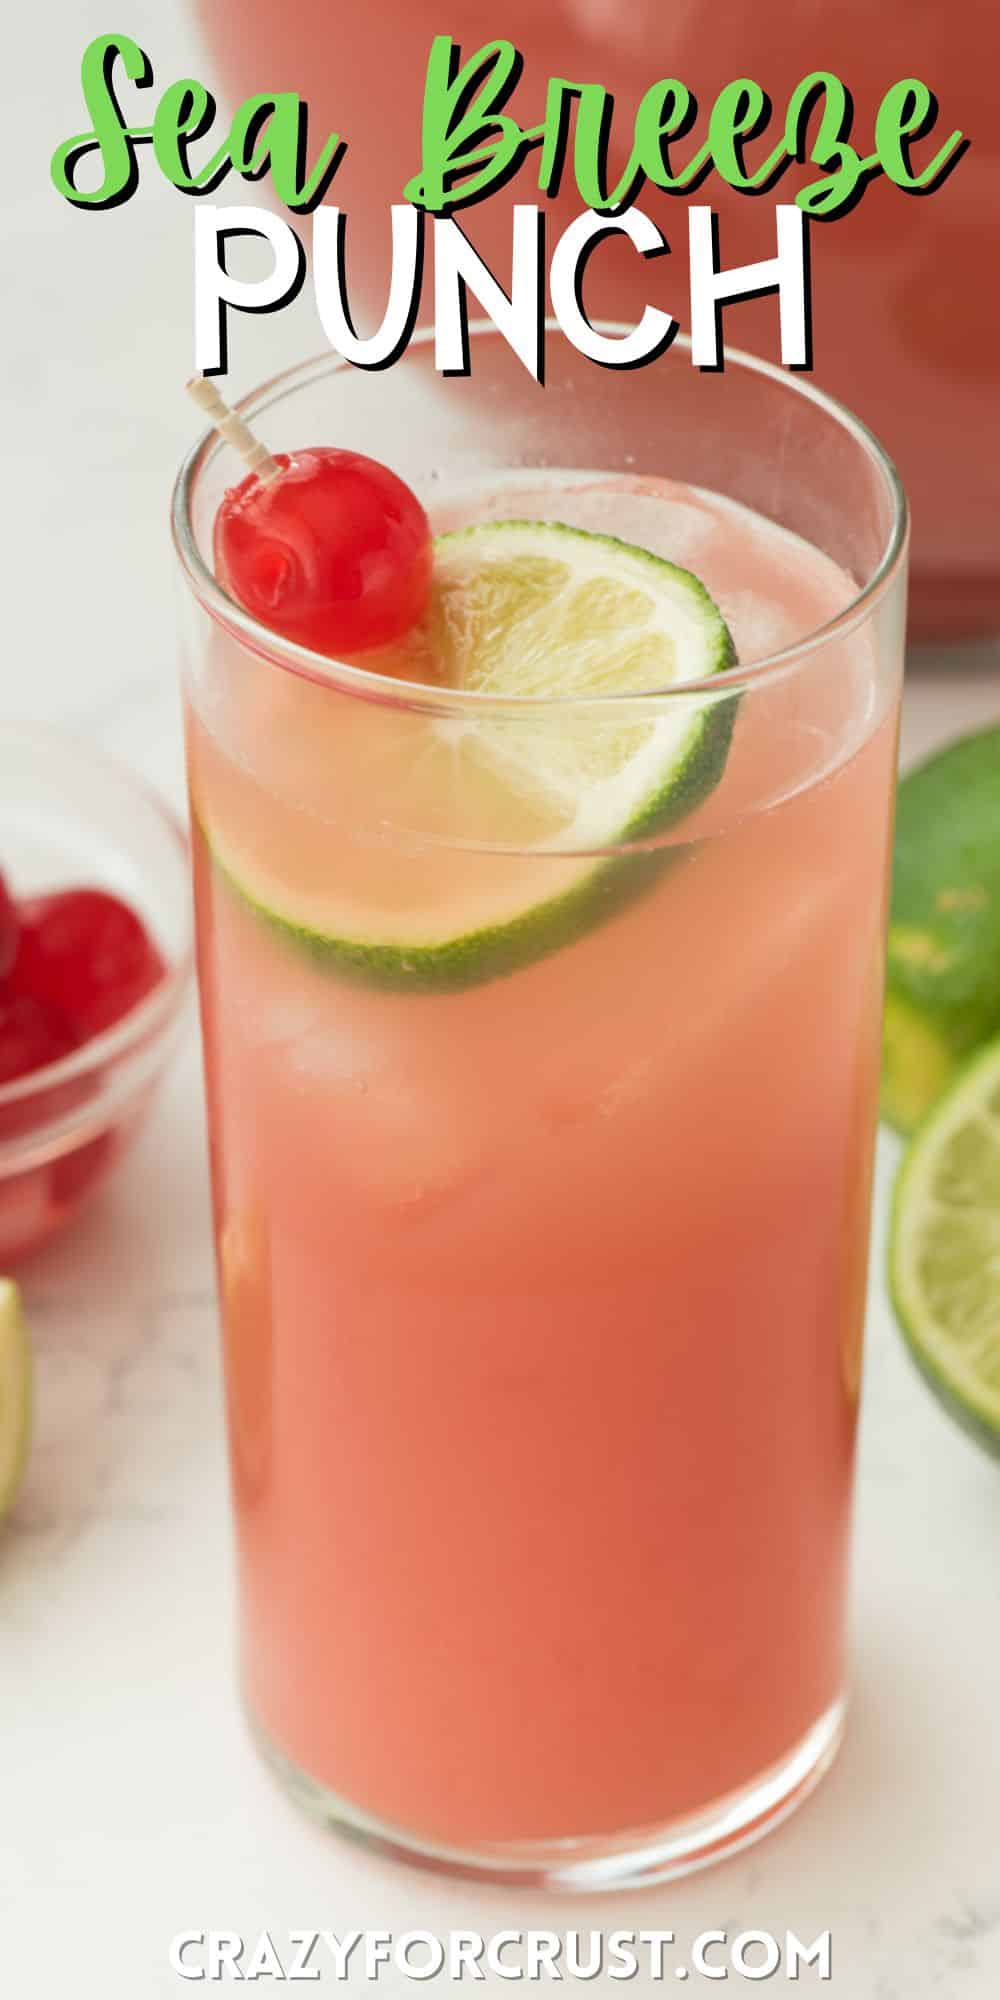 pink drink in a tall clear glass with a lime and a cherry inside with words on the image.